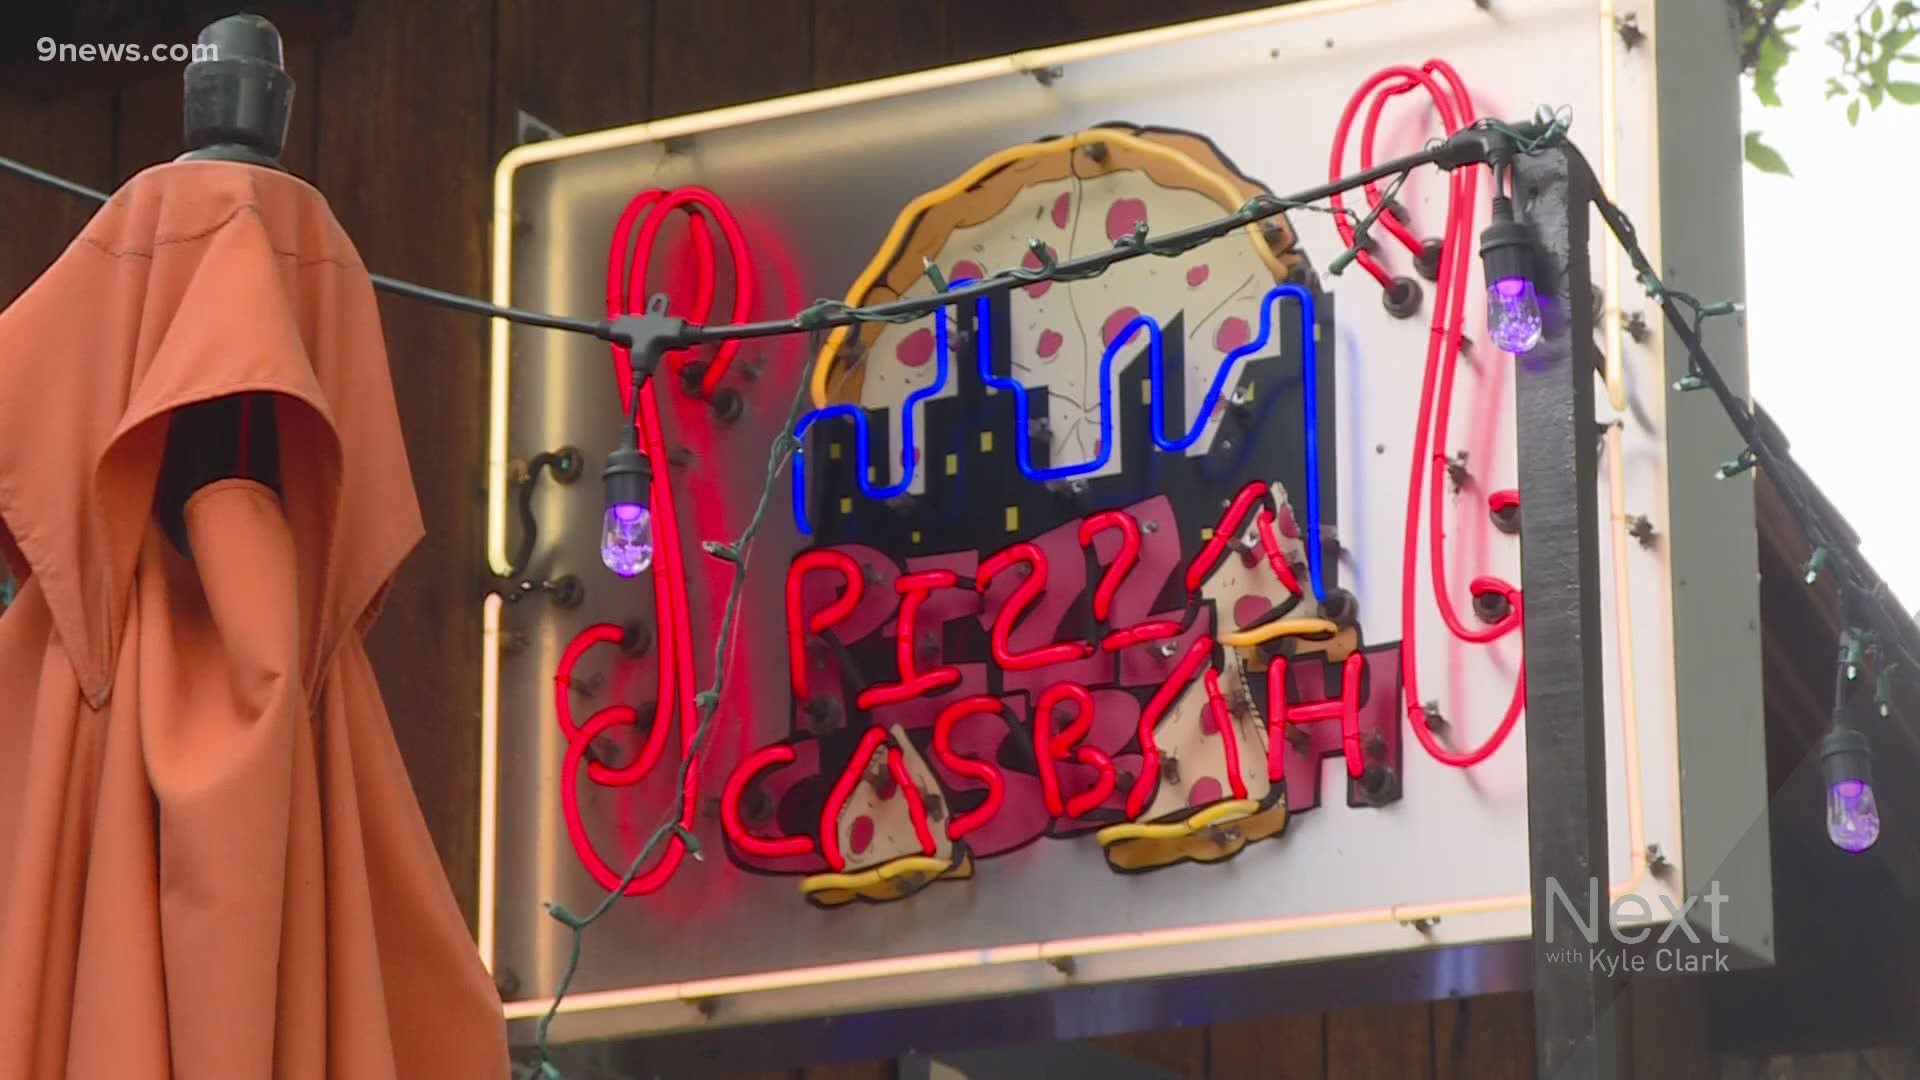 It's been four months since Peter Harvey served up dozens of pizzas a day at Pizza Casbah in Fort Collins. His business is near Colorado State University.